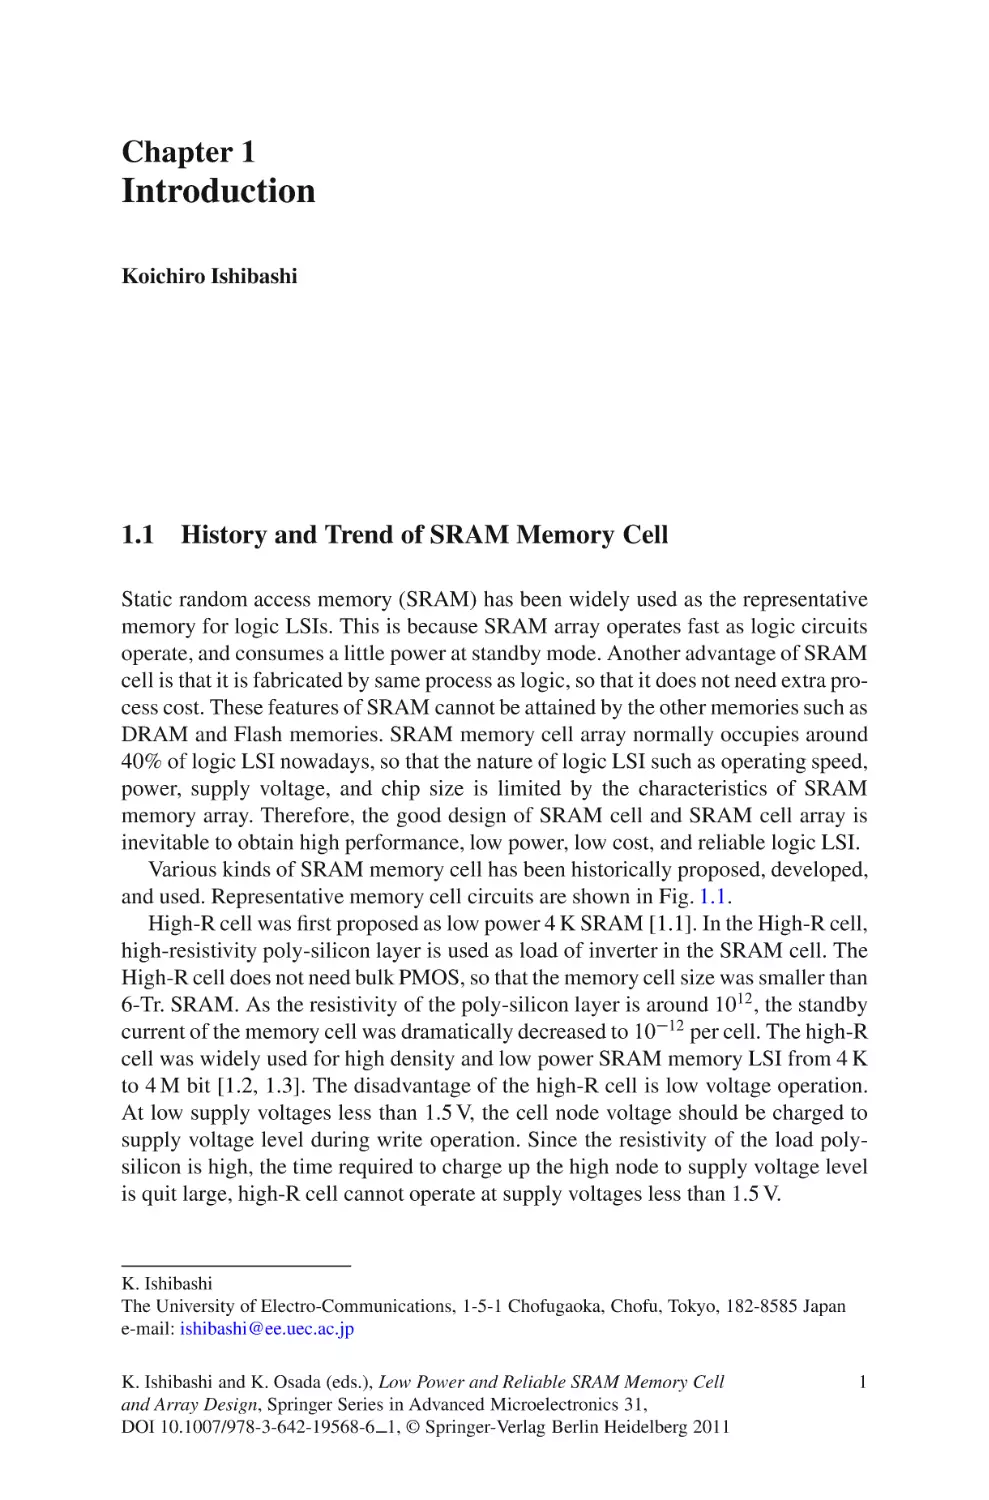 fulltext
Chapter 1
1.1 History and Trend of SRAM Memory Cell